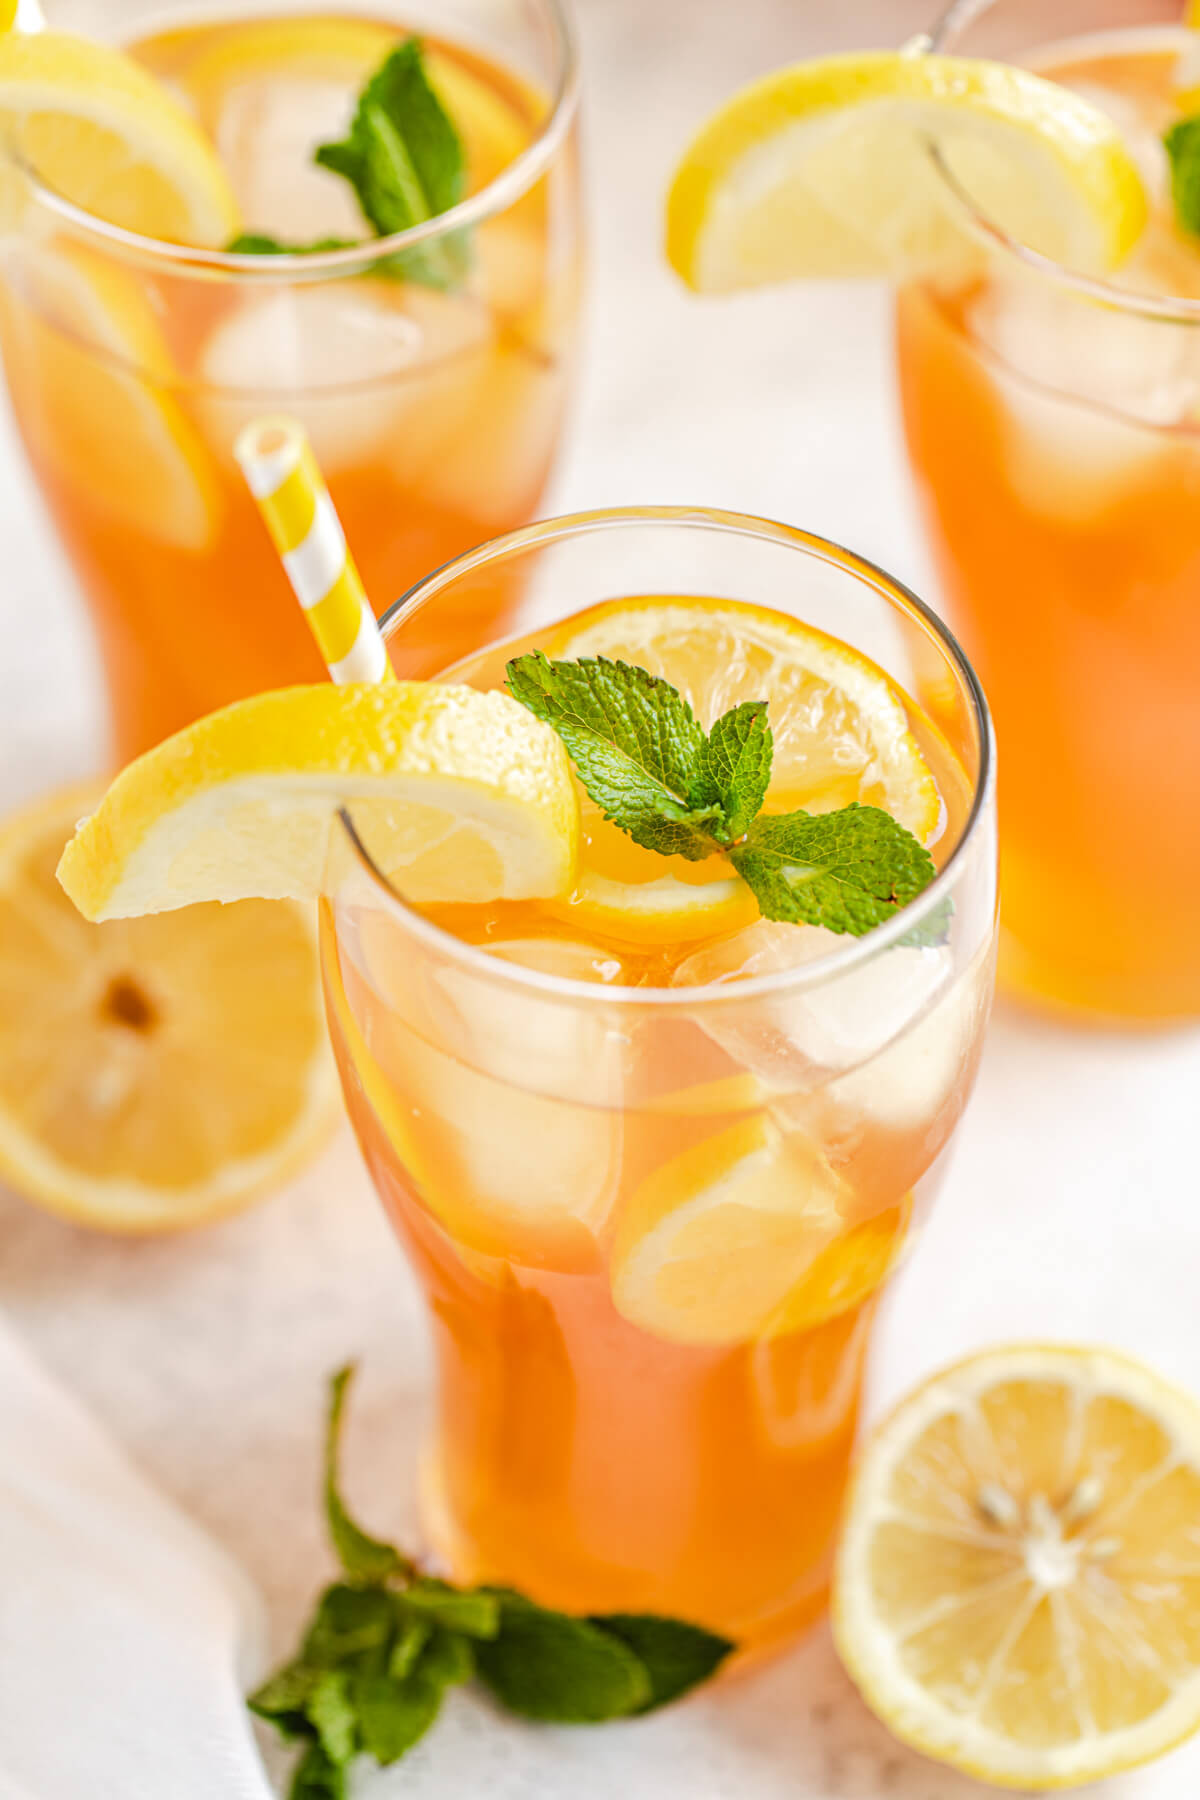 close up showing the inside of a glass filled with iced tea, ice cubes, mint leaves, lemon slices and a yellow straw